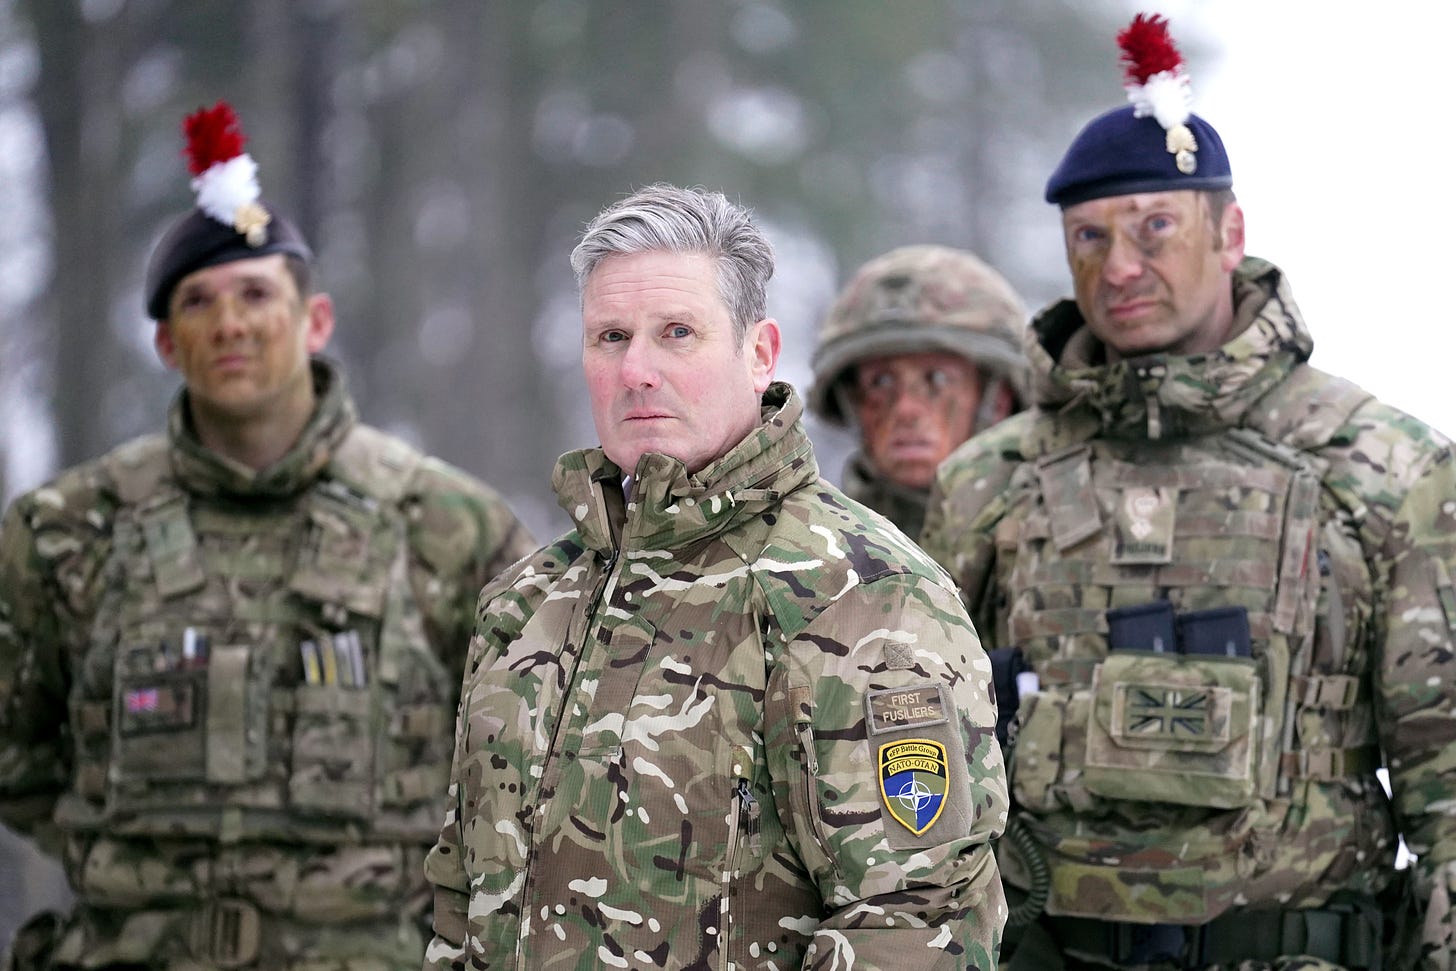 Keir Starmer channels Thatcher with military photo op | The Independent